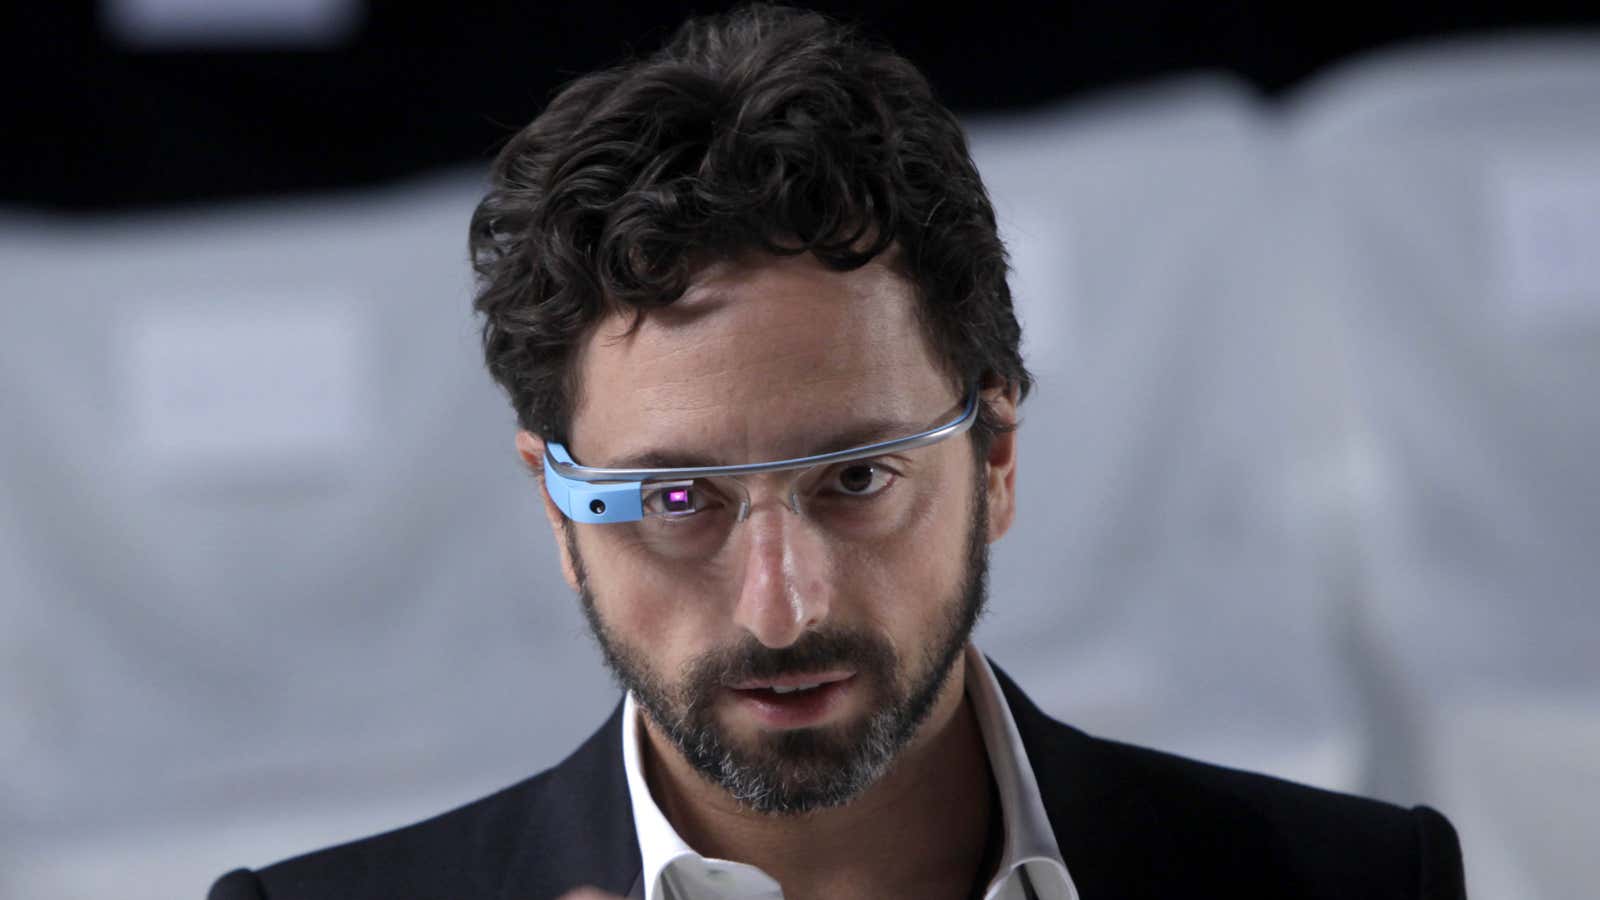 Sergey Brin is not watching you.